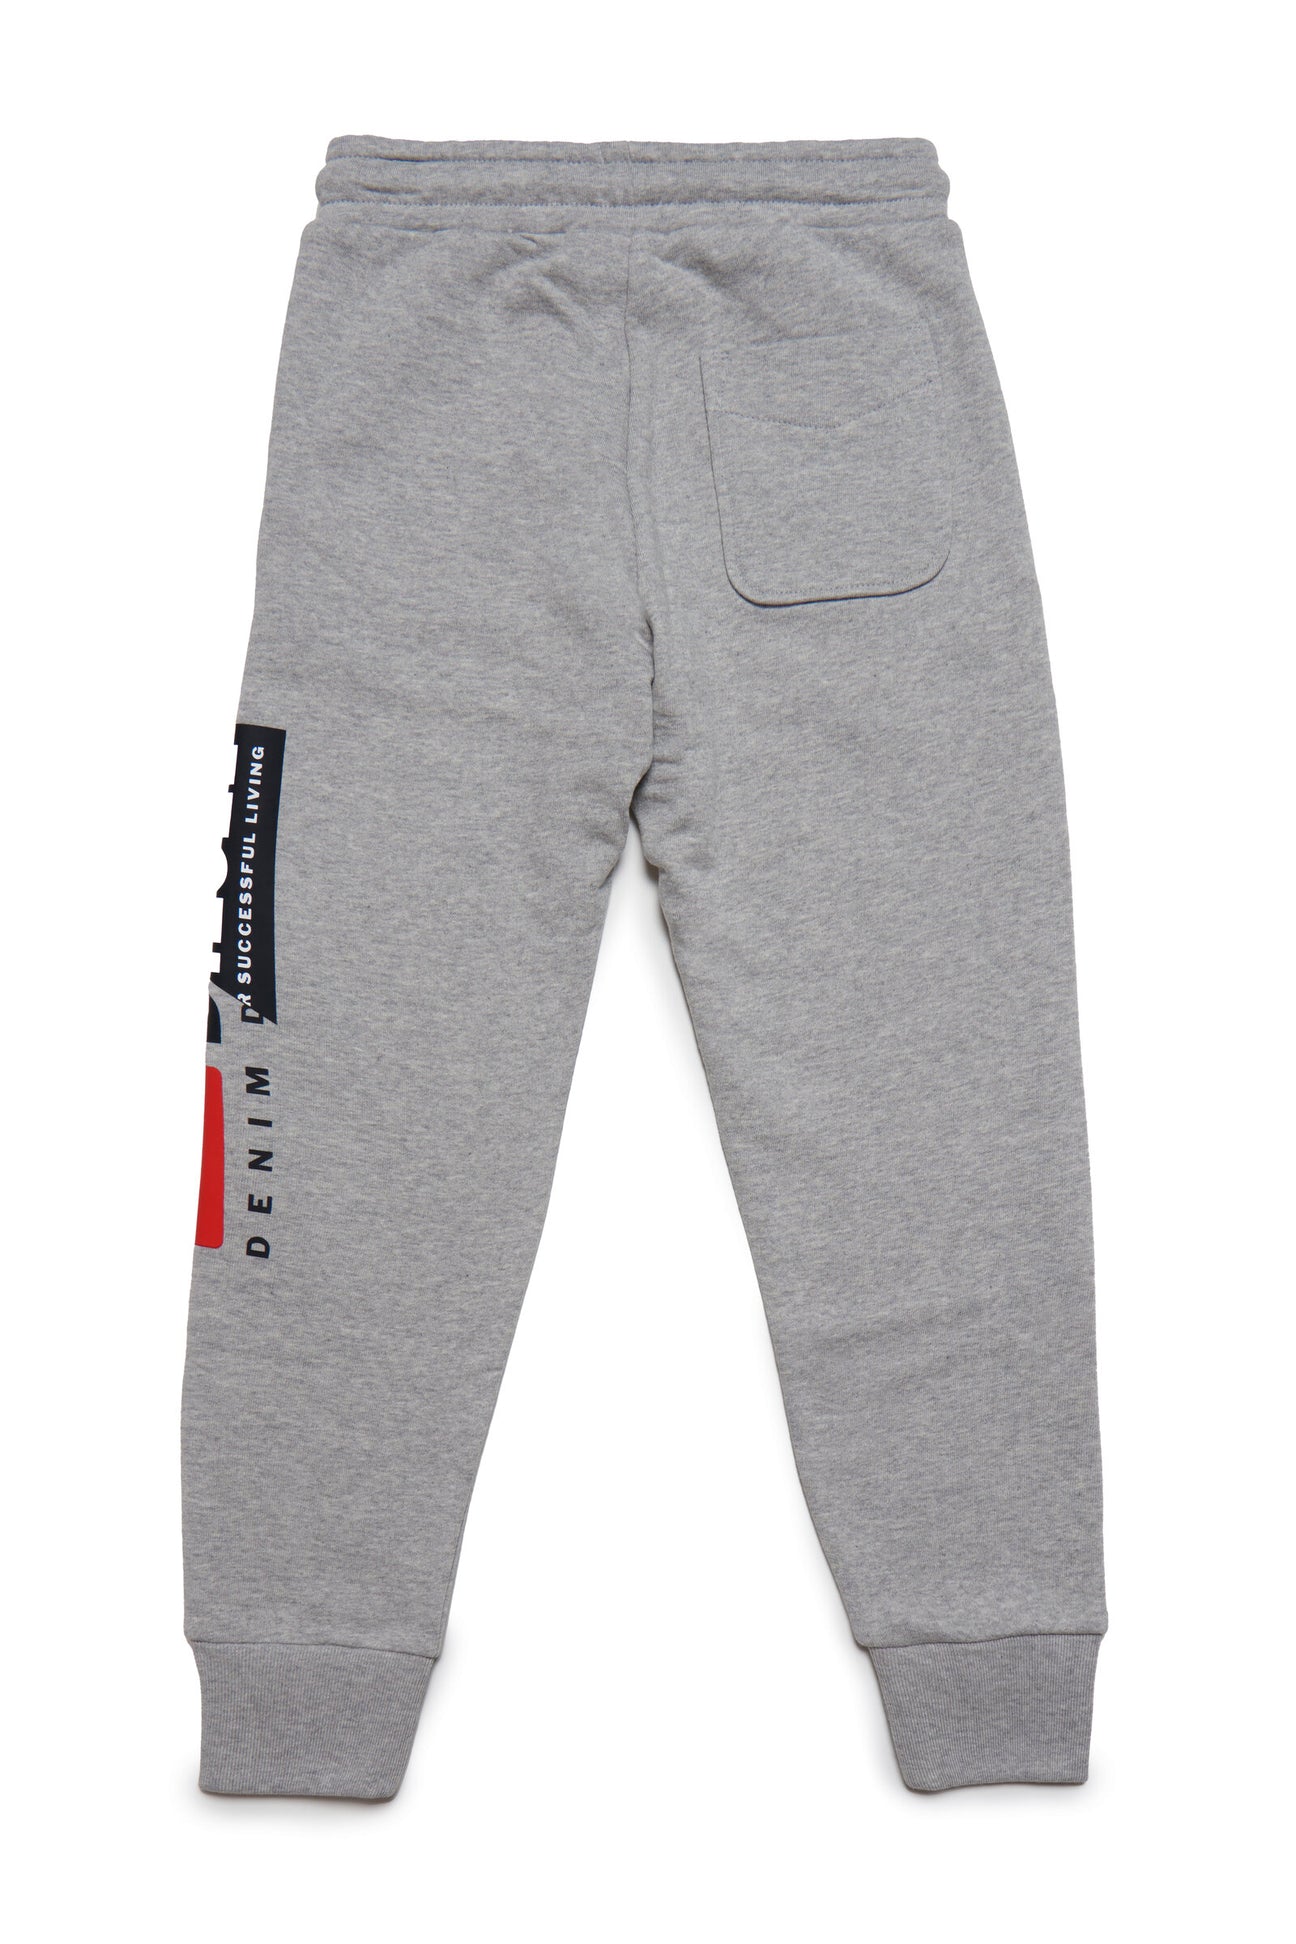 Gray jogger pants with Diesel double logo Gray jogger pants with Diesel double logo